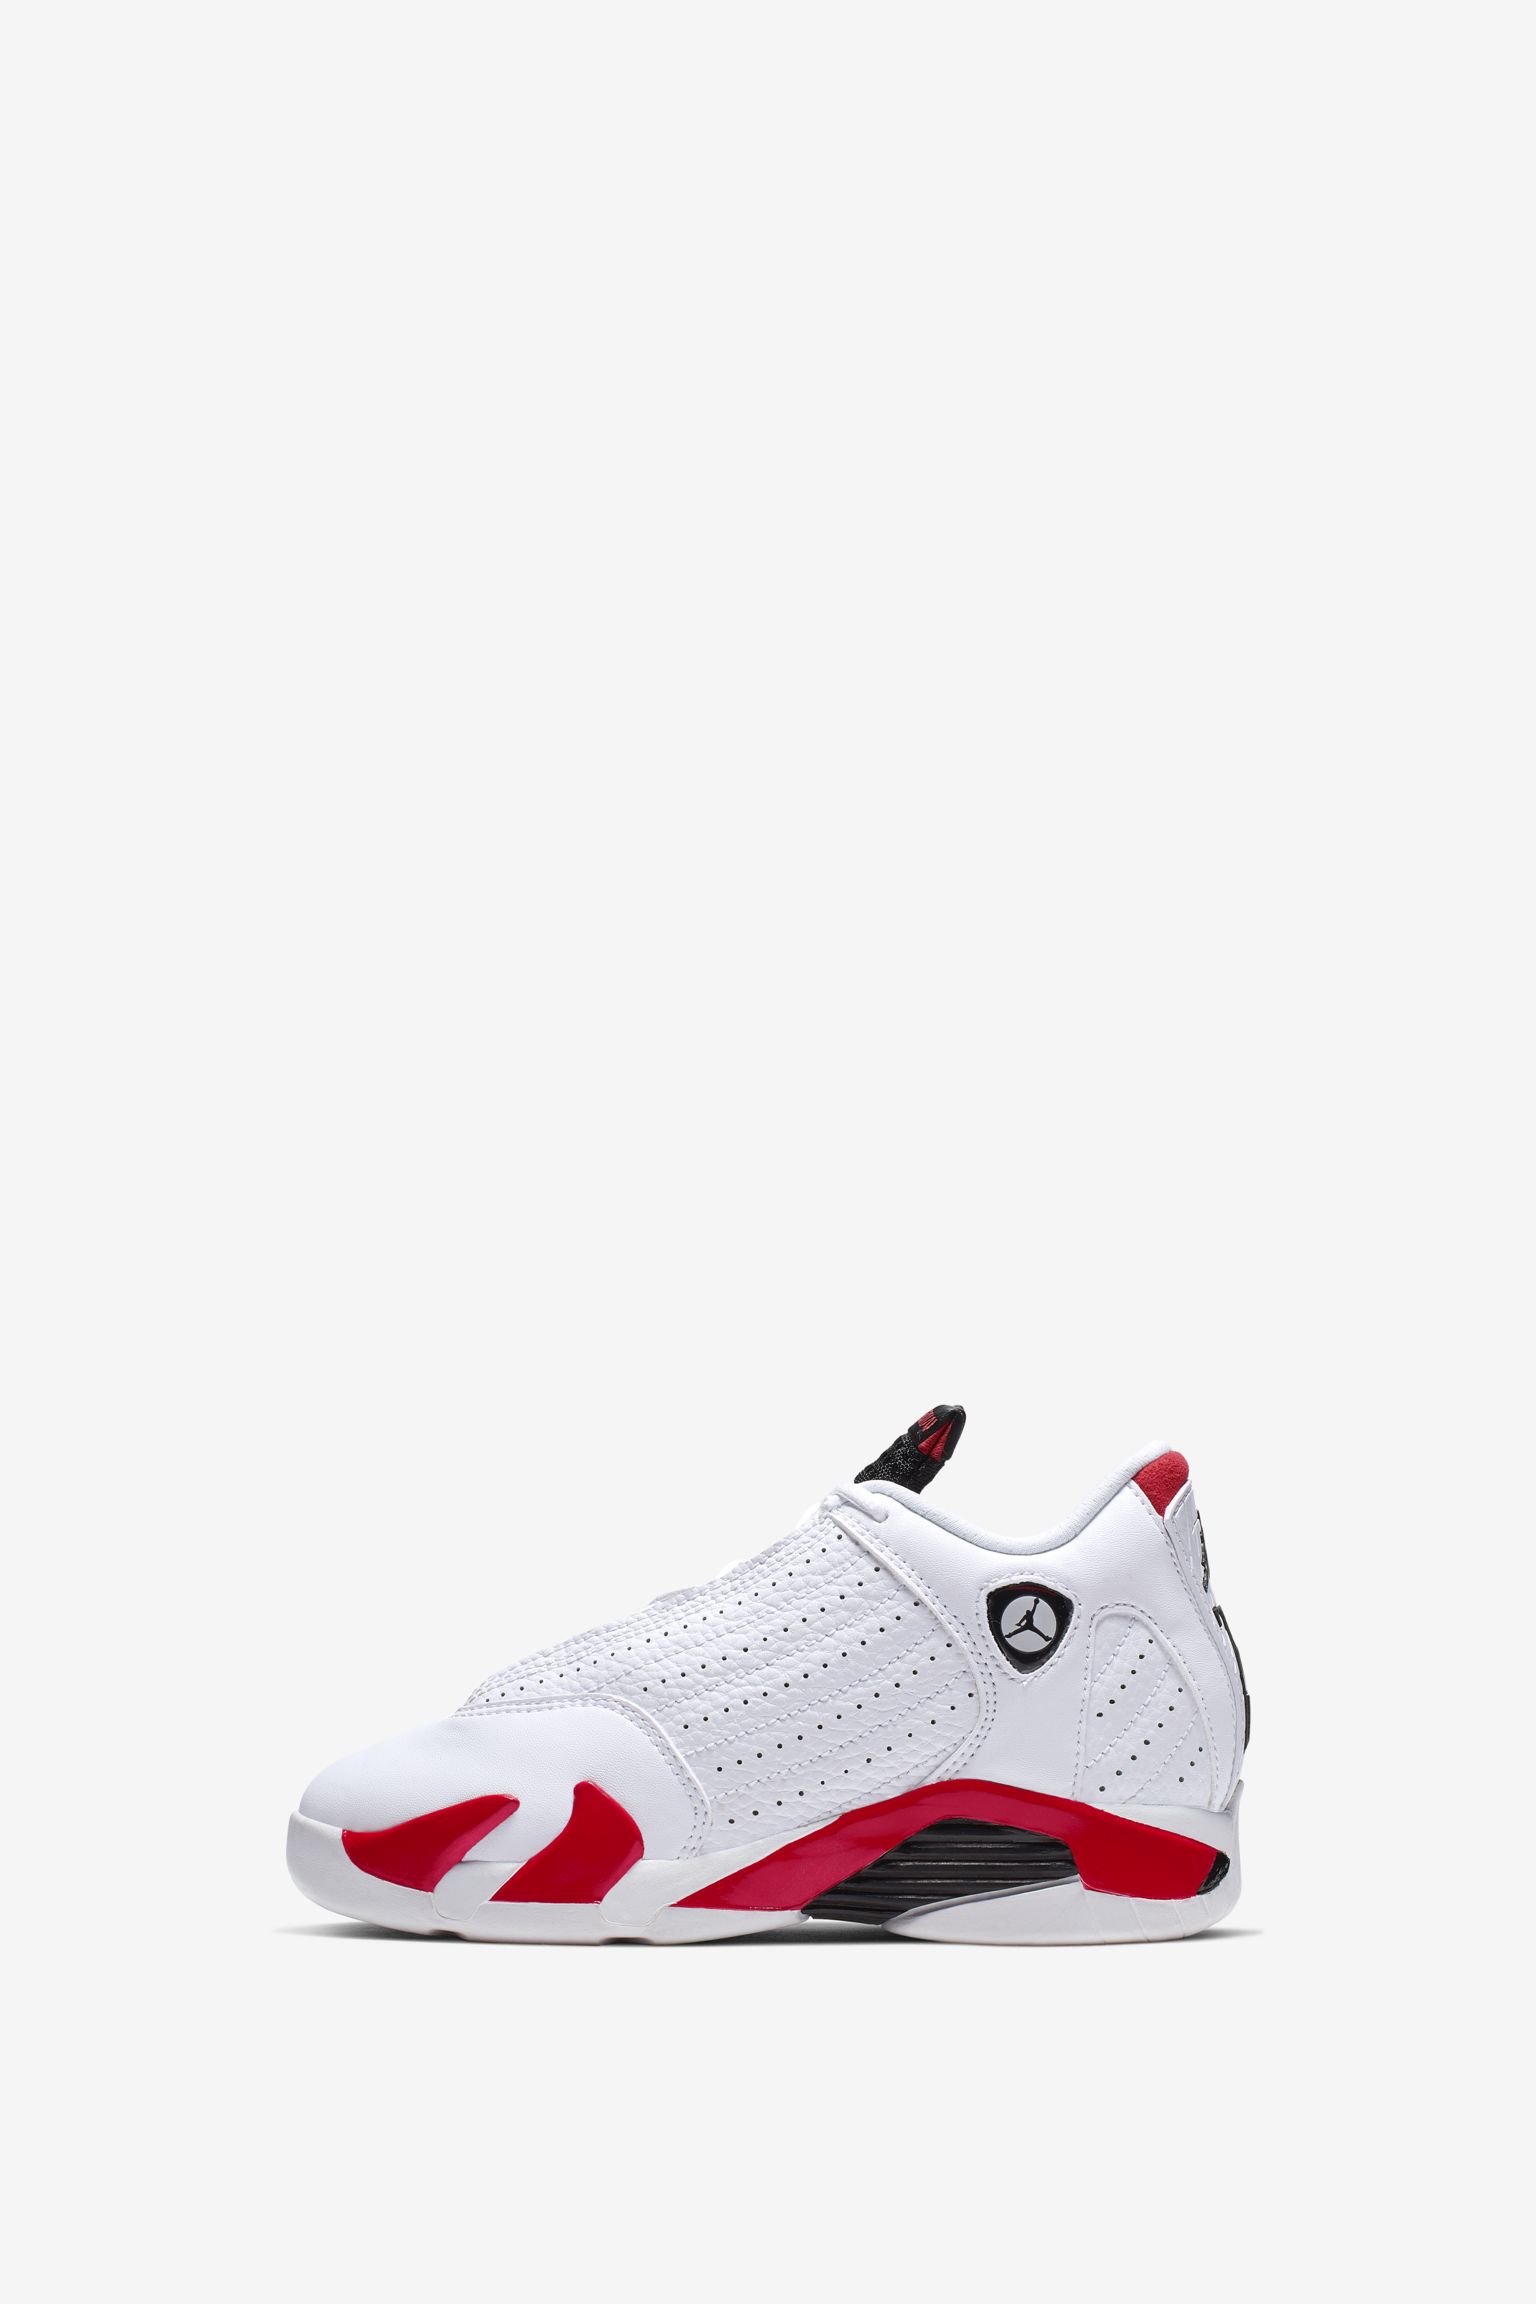 jordan 14 red and white